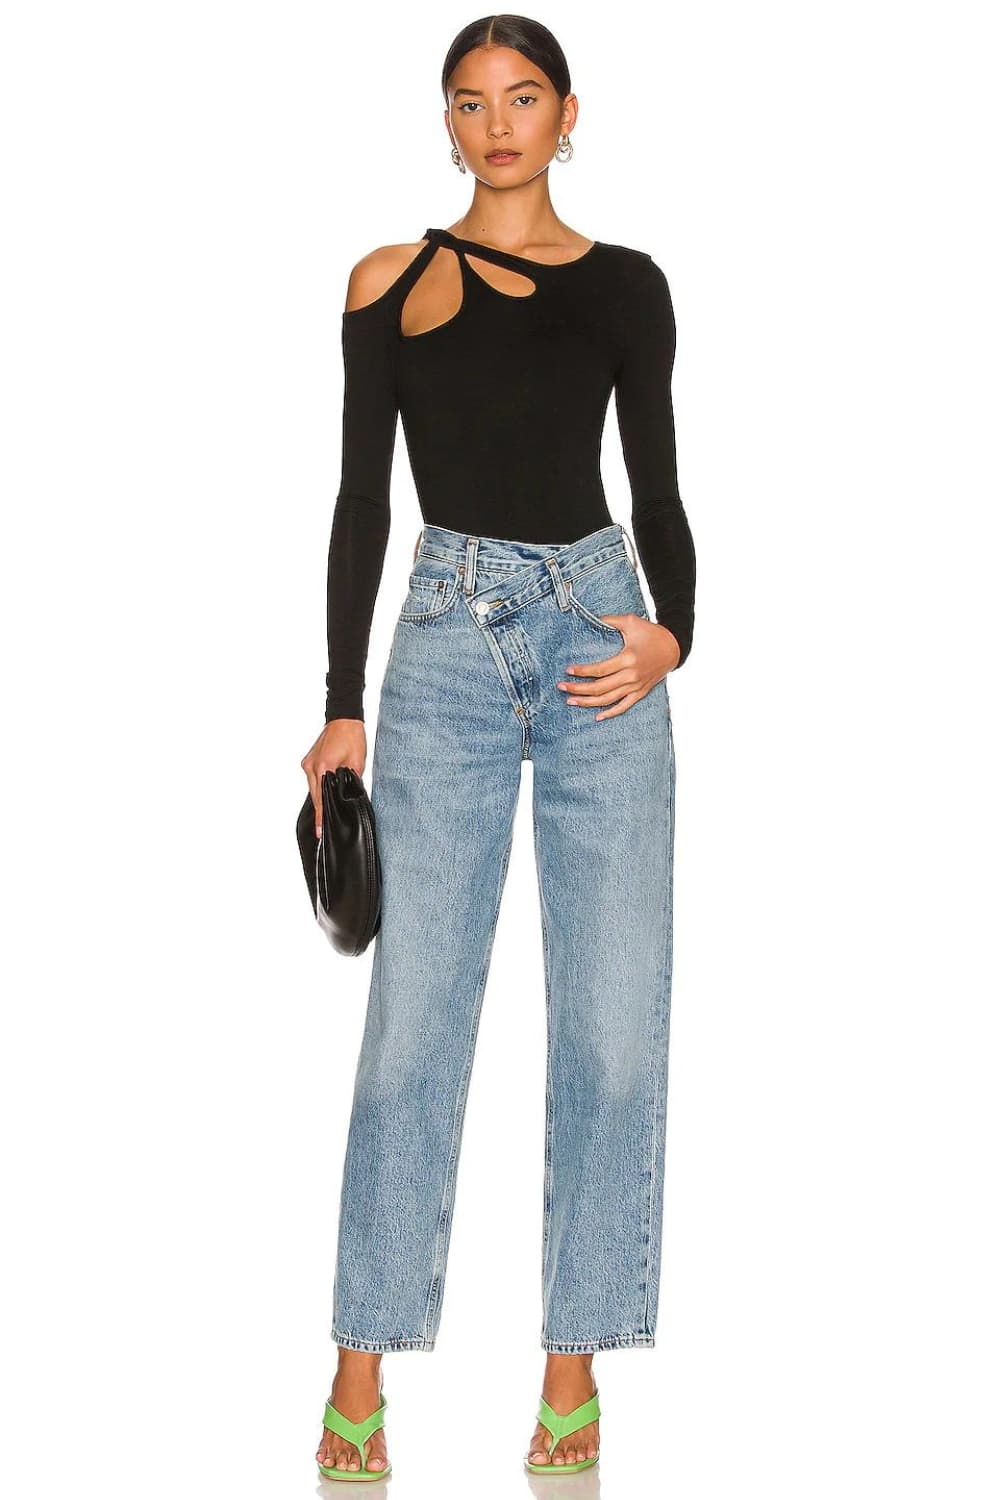 Bar outfit for ladies - Black Bodysuit and Jeans